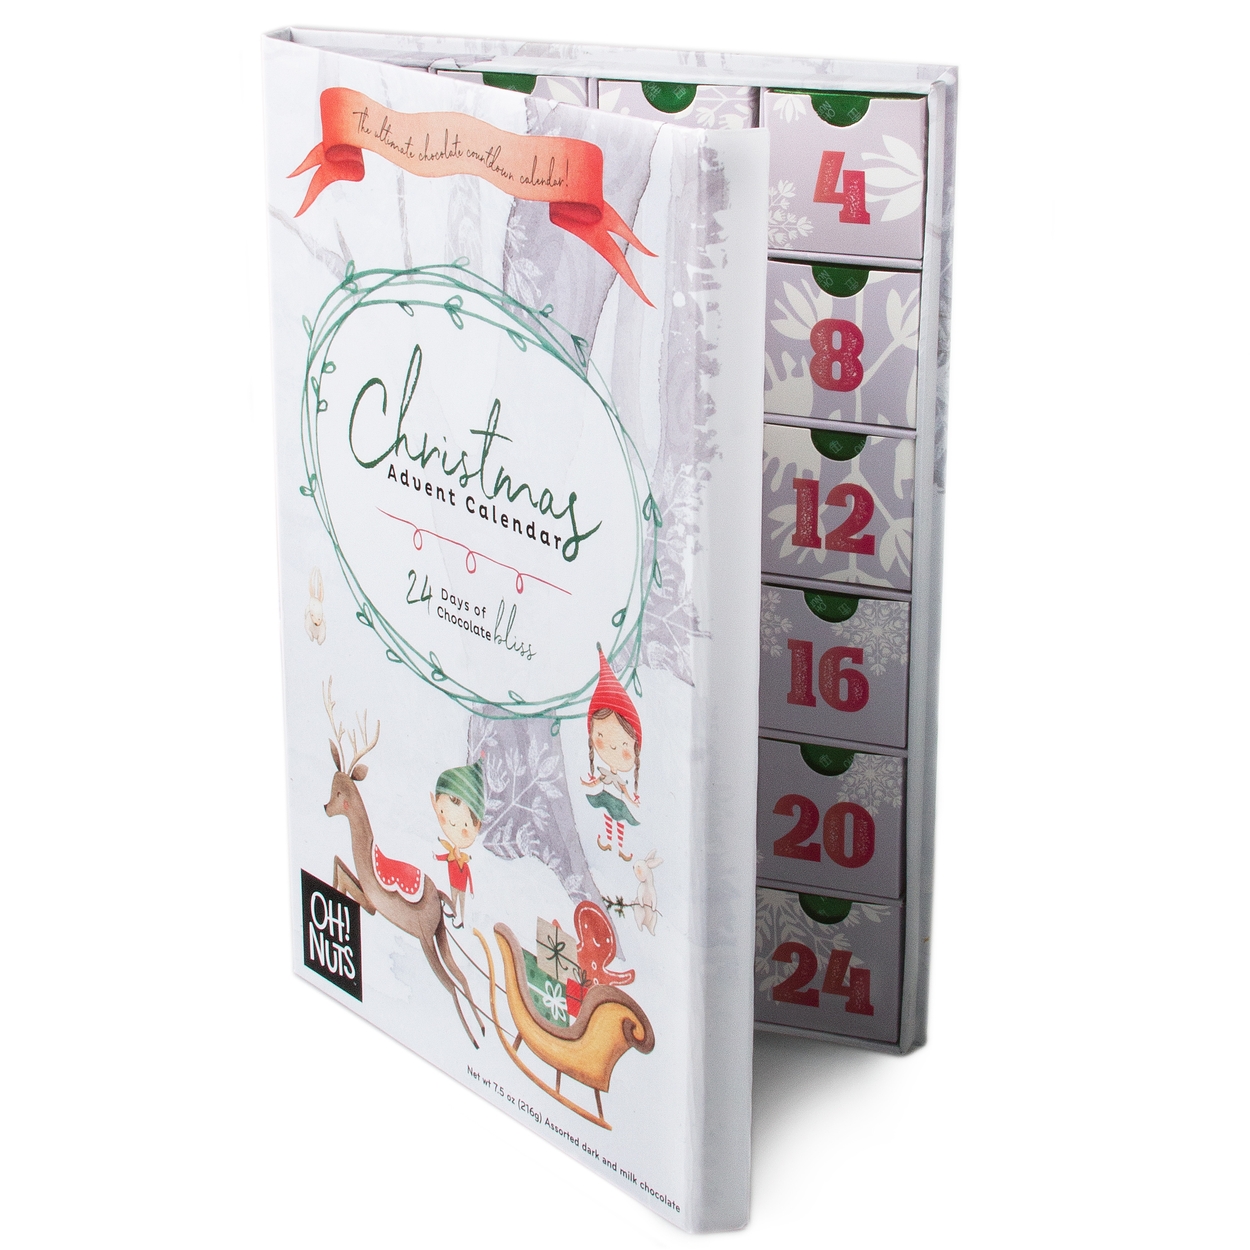 Oh! Nuts Holiday Chocolate Variety Advent Calendar Gift Box • Holiday